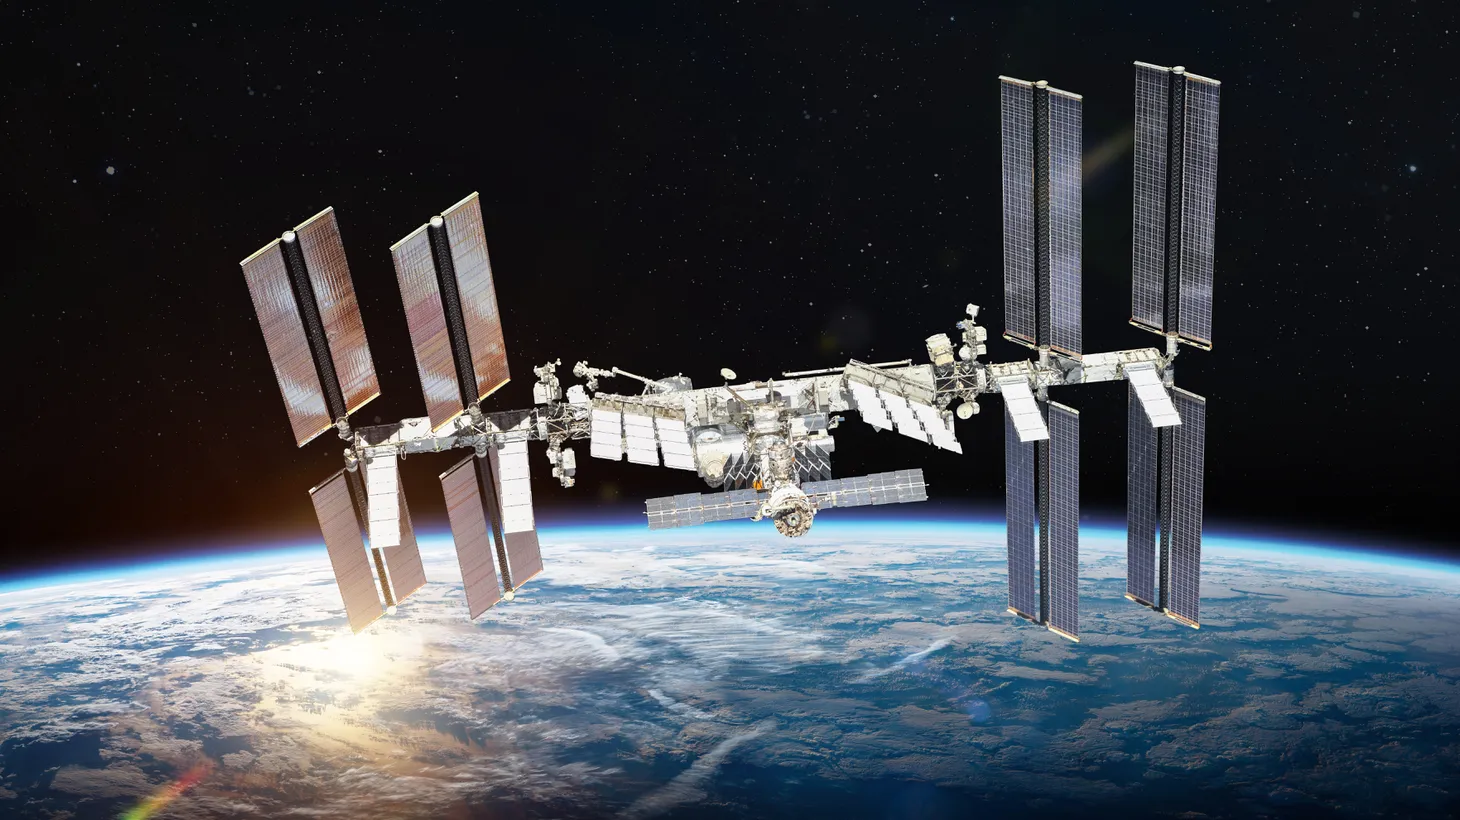 The International Space Station will have new visitors: private citizens sent there via a SpaceX rocket.